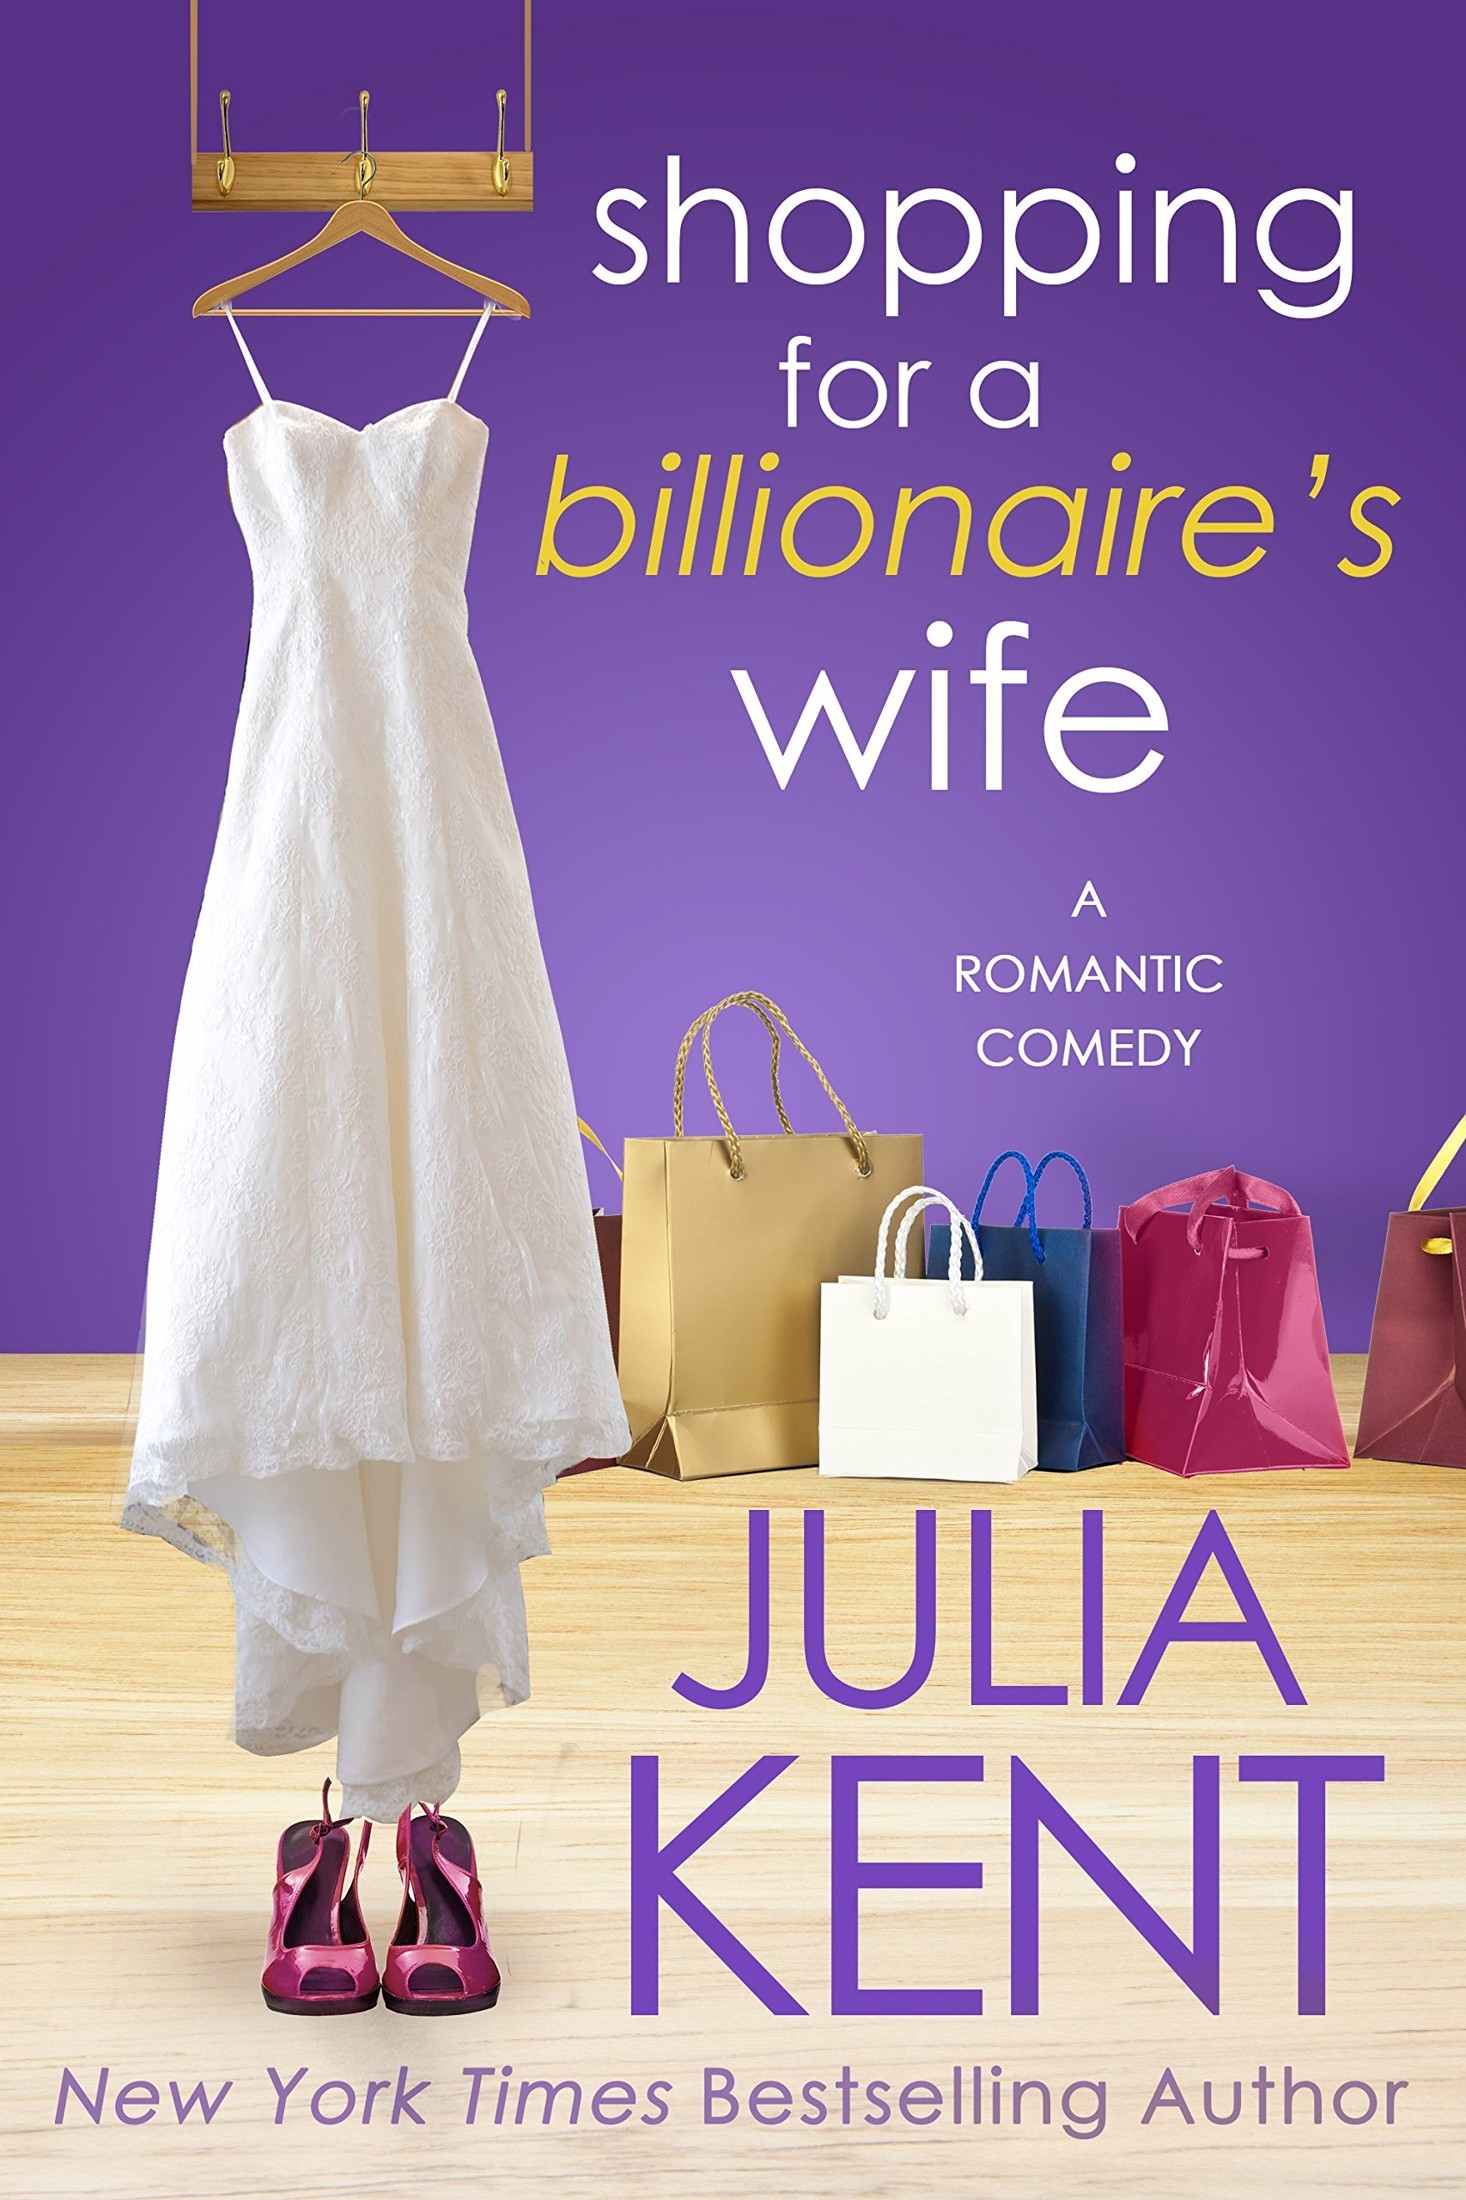 Shopping for a Billionaire's Wife by Julia Kent